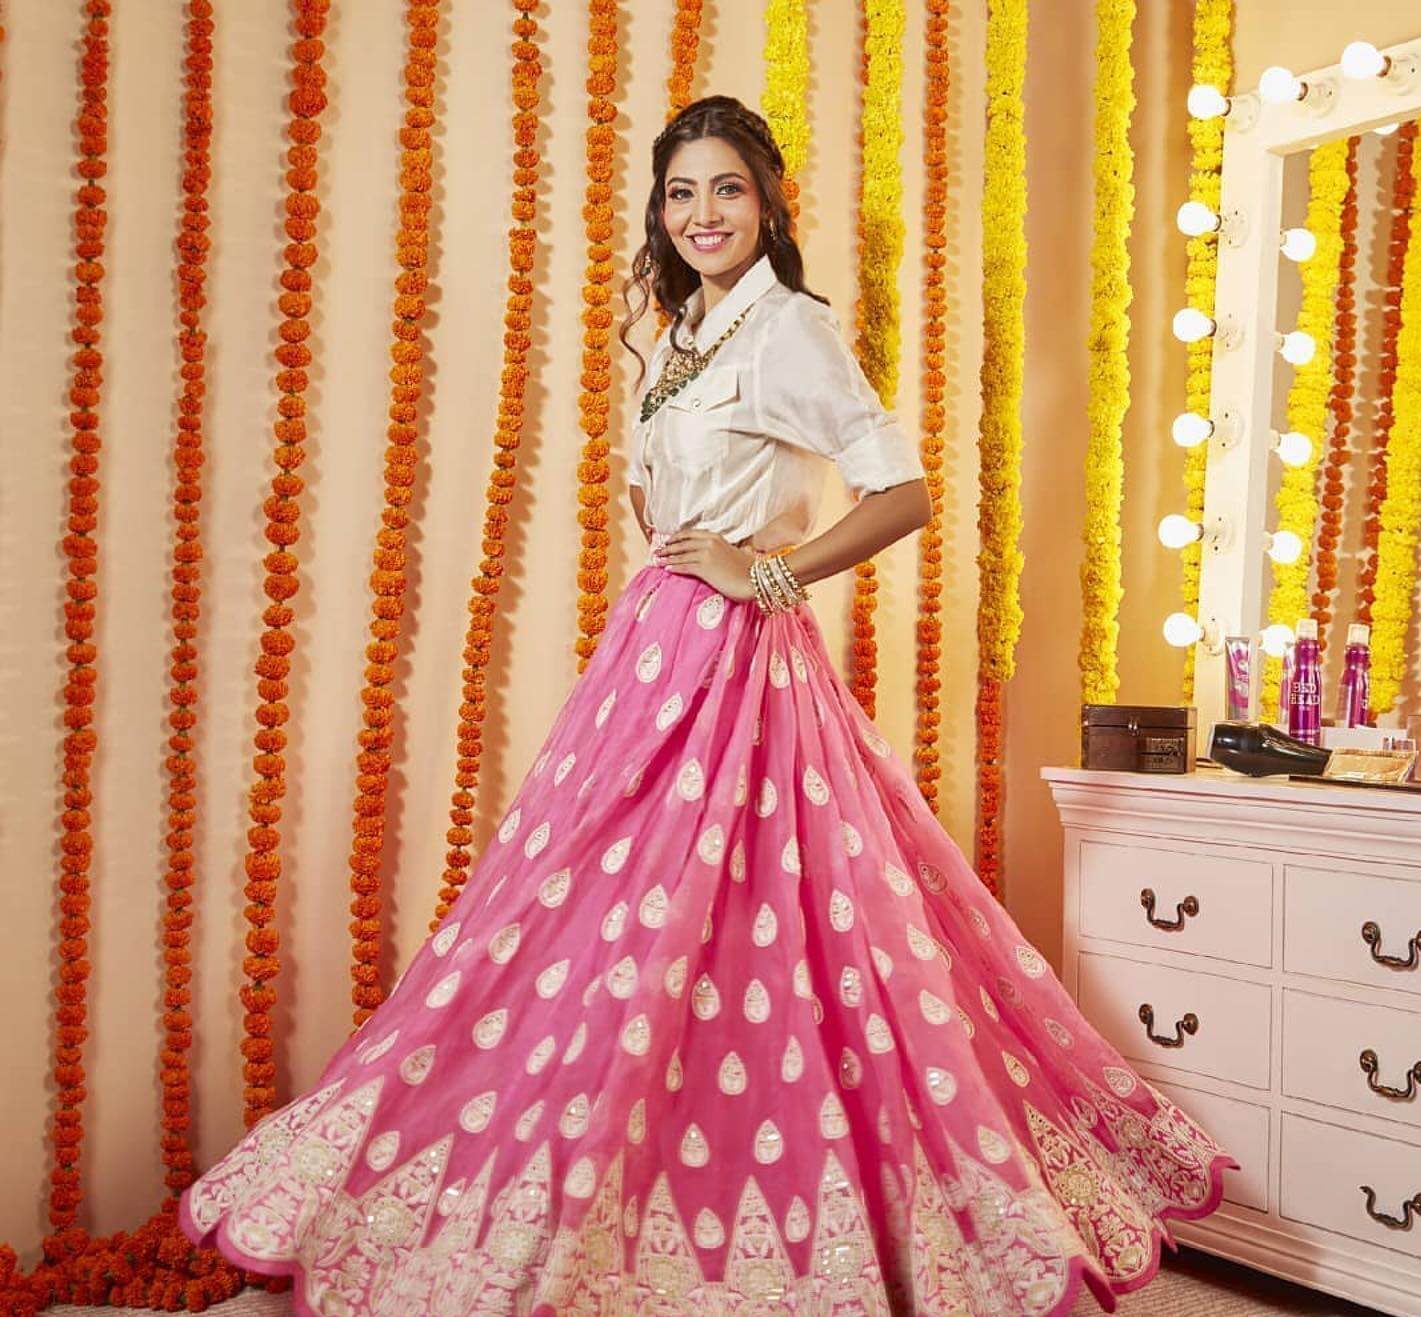 Swathi Muppala Fusion Look In Off White Shirt With Pink Embroidered Skirt Look Festive